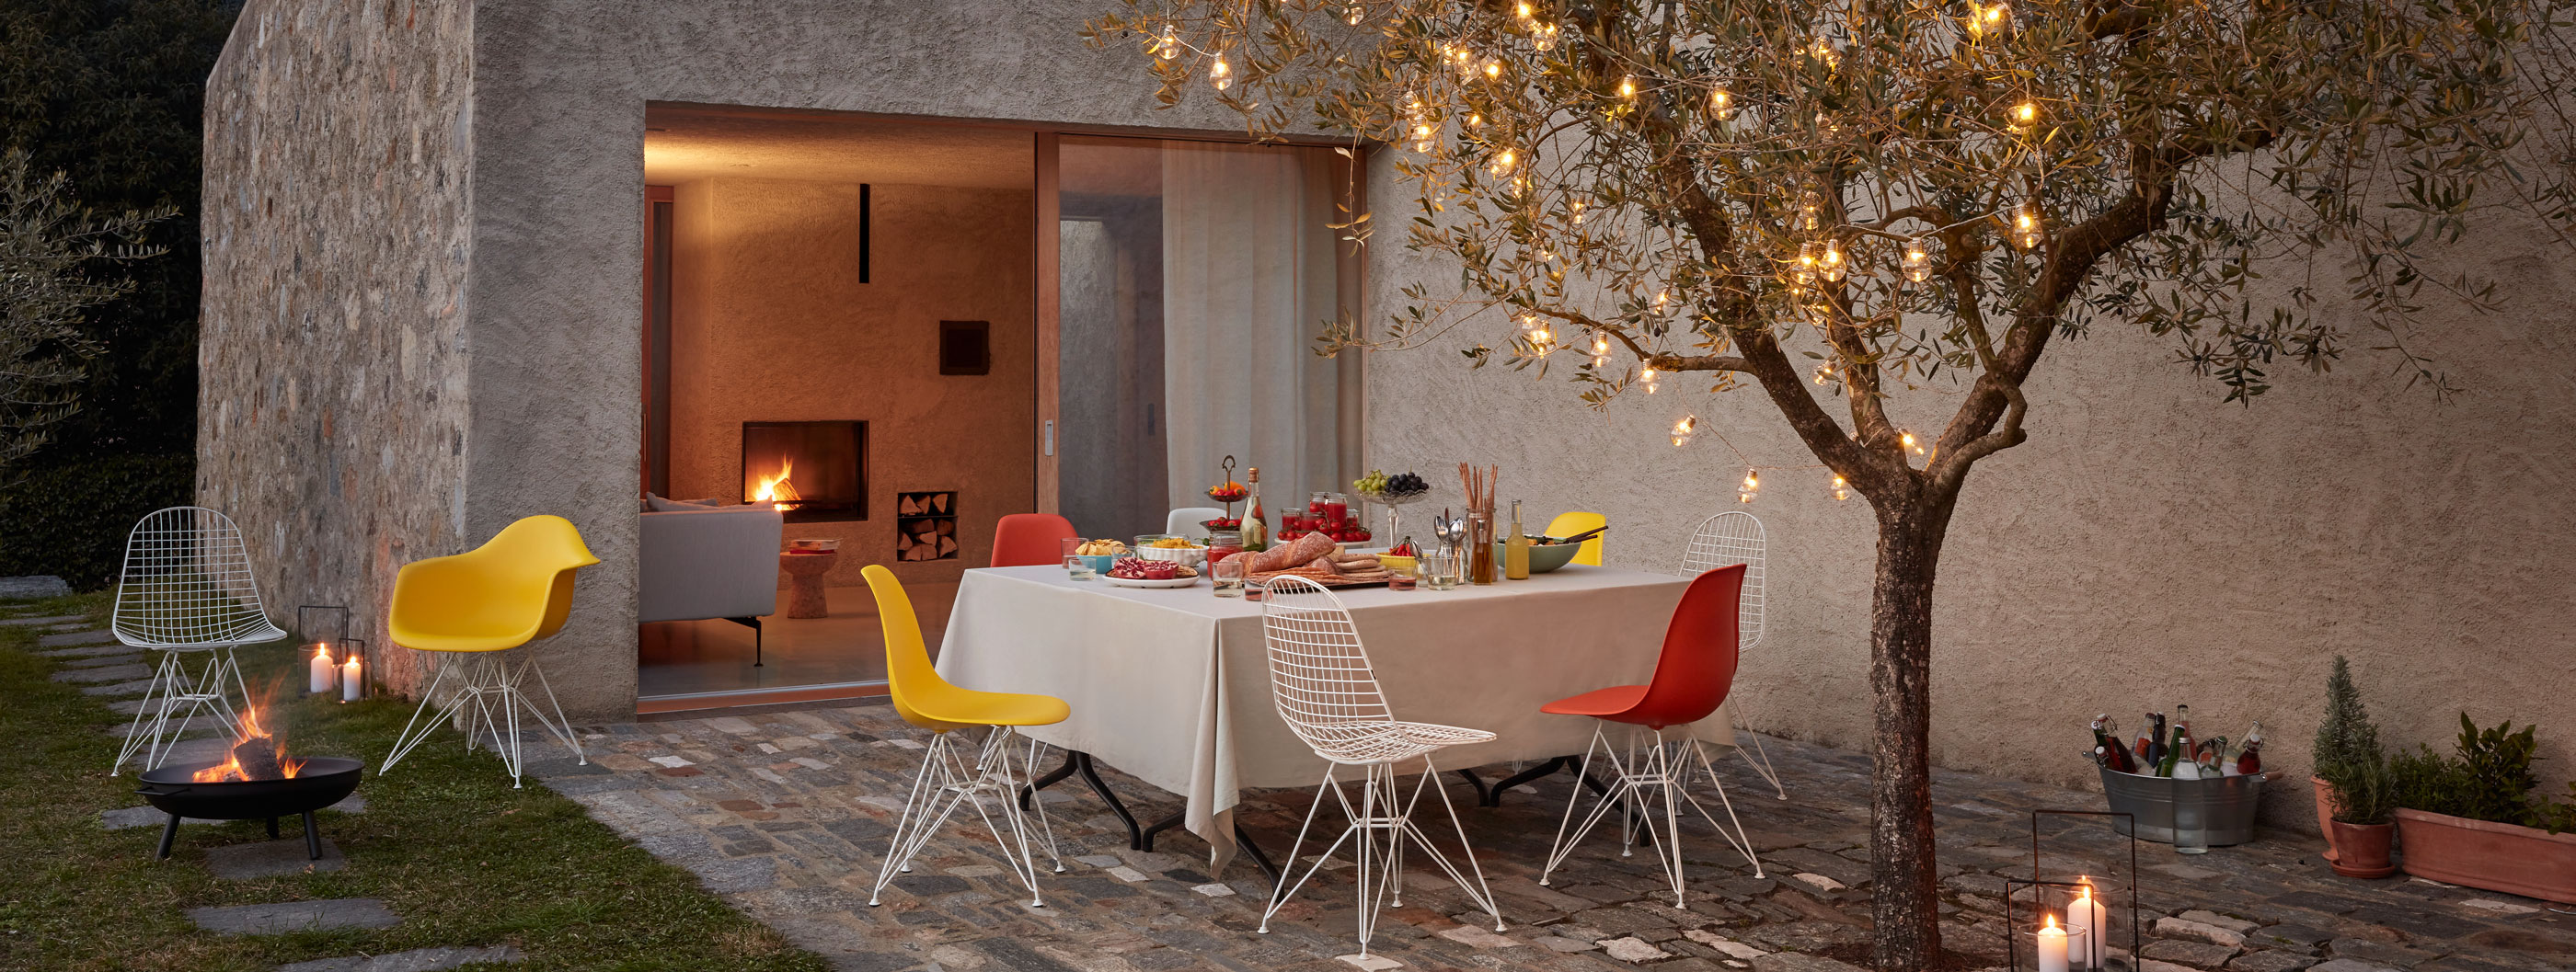 Home Stories for Spring by Vitra